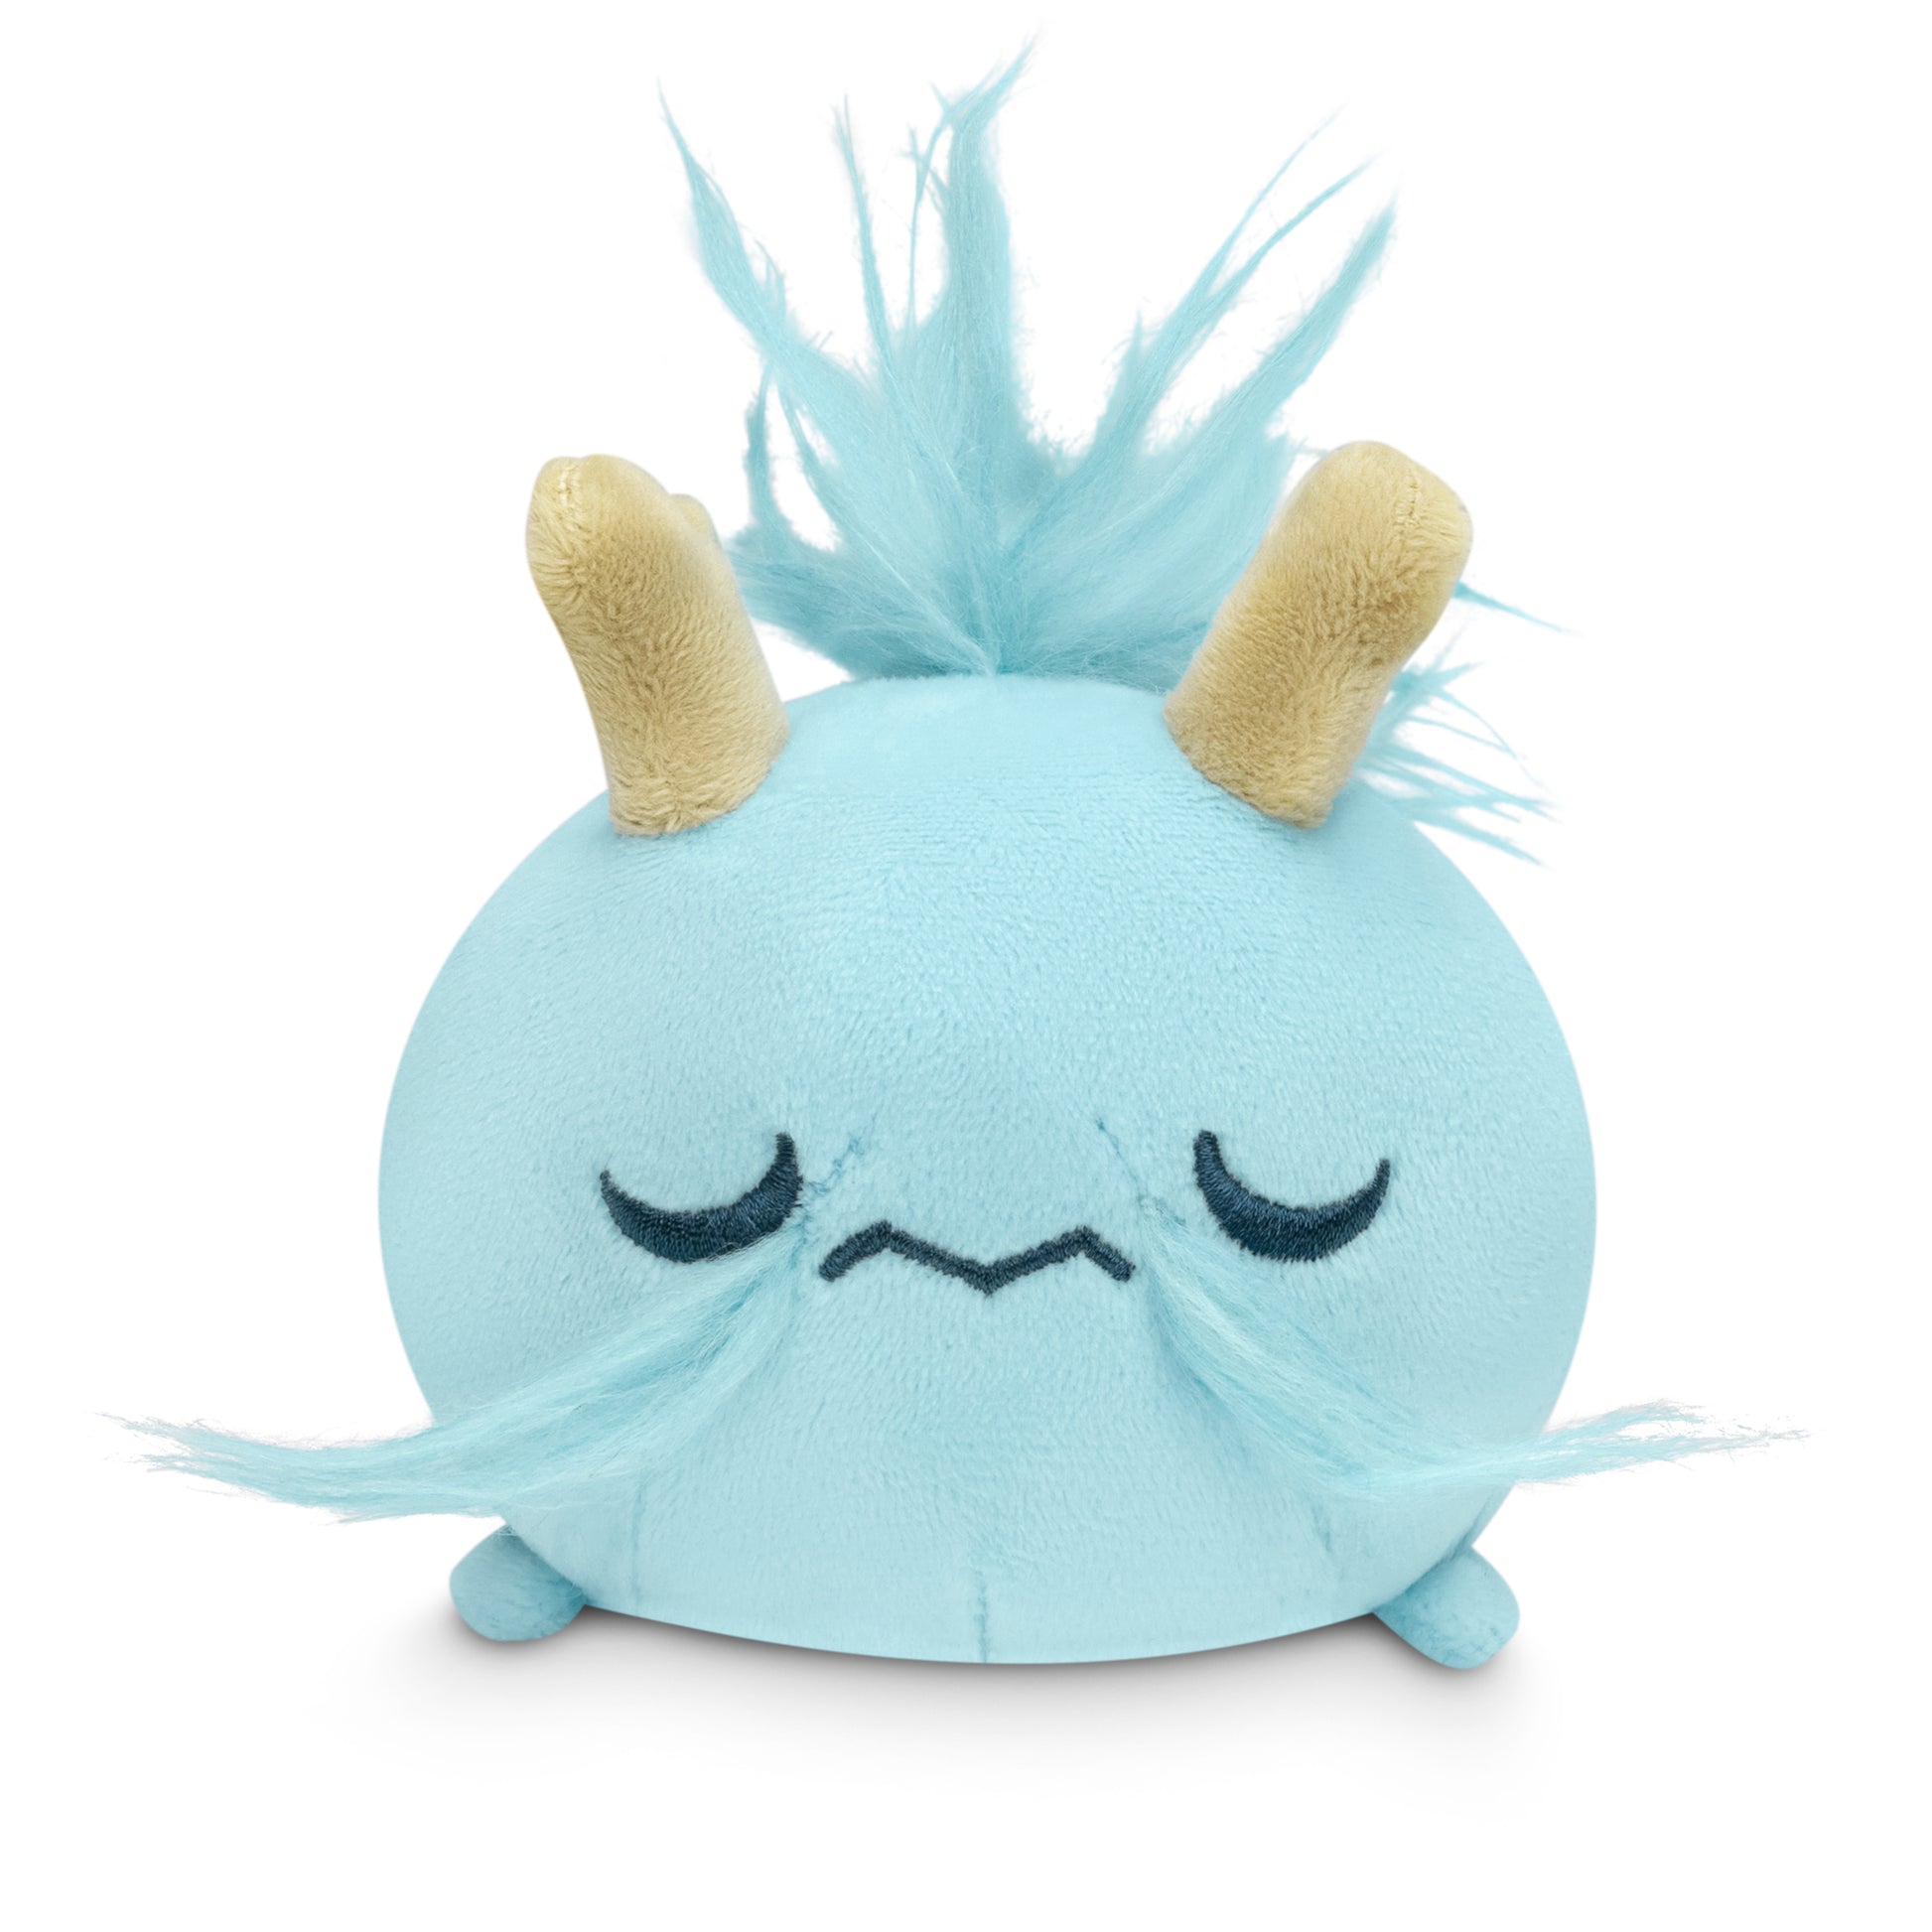 A blue Plushiverse Realm of the Dragon Plushie Tote Bag with long hair and horns from TeeTurtle plushies.